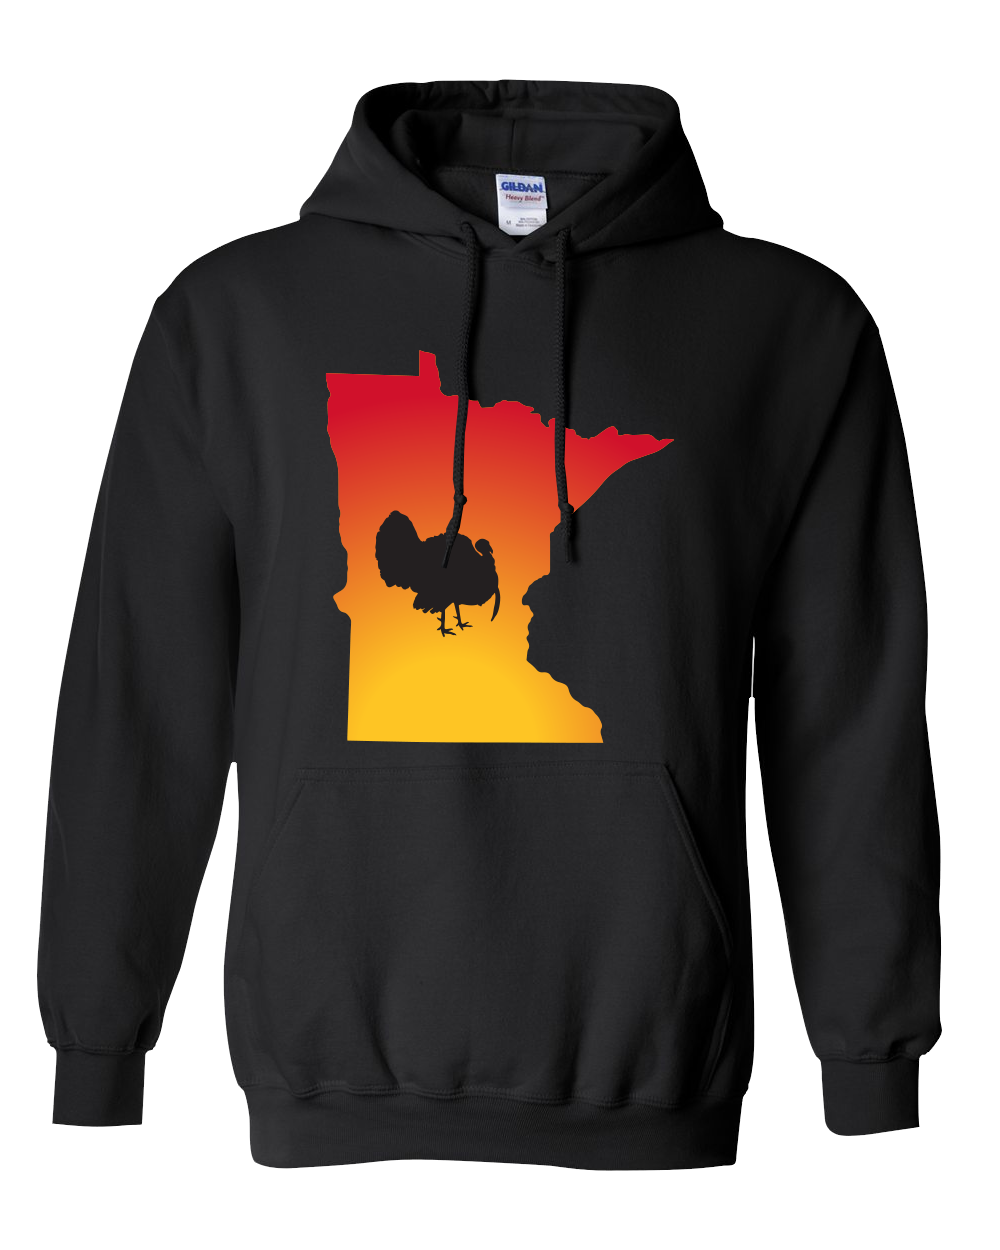 Pullover Hooded Sweatshirt Minnesota Black Turkey Vibrant Design High Quality Tight Knit Ring Spun Low Maintenance Cotton Printed With The Newest Available Color Transfer Technology